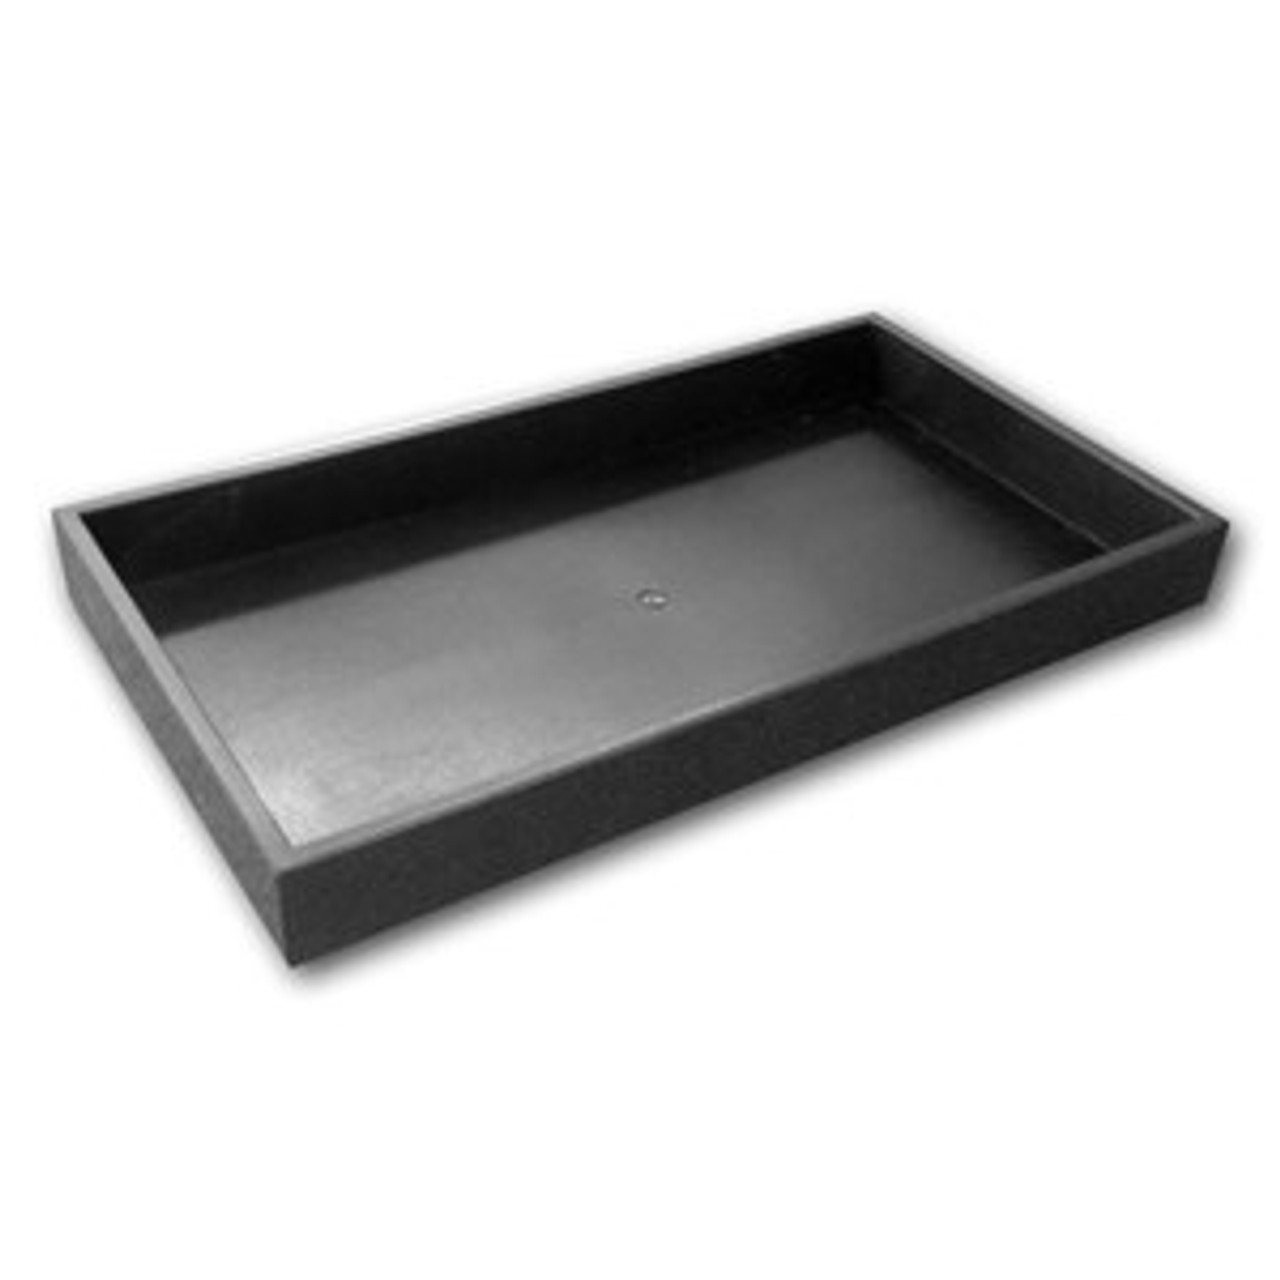 Stackable Black Plastic Conductive Tray Polypropylene For Small